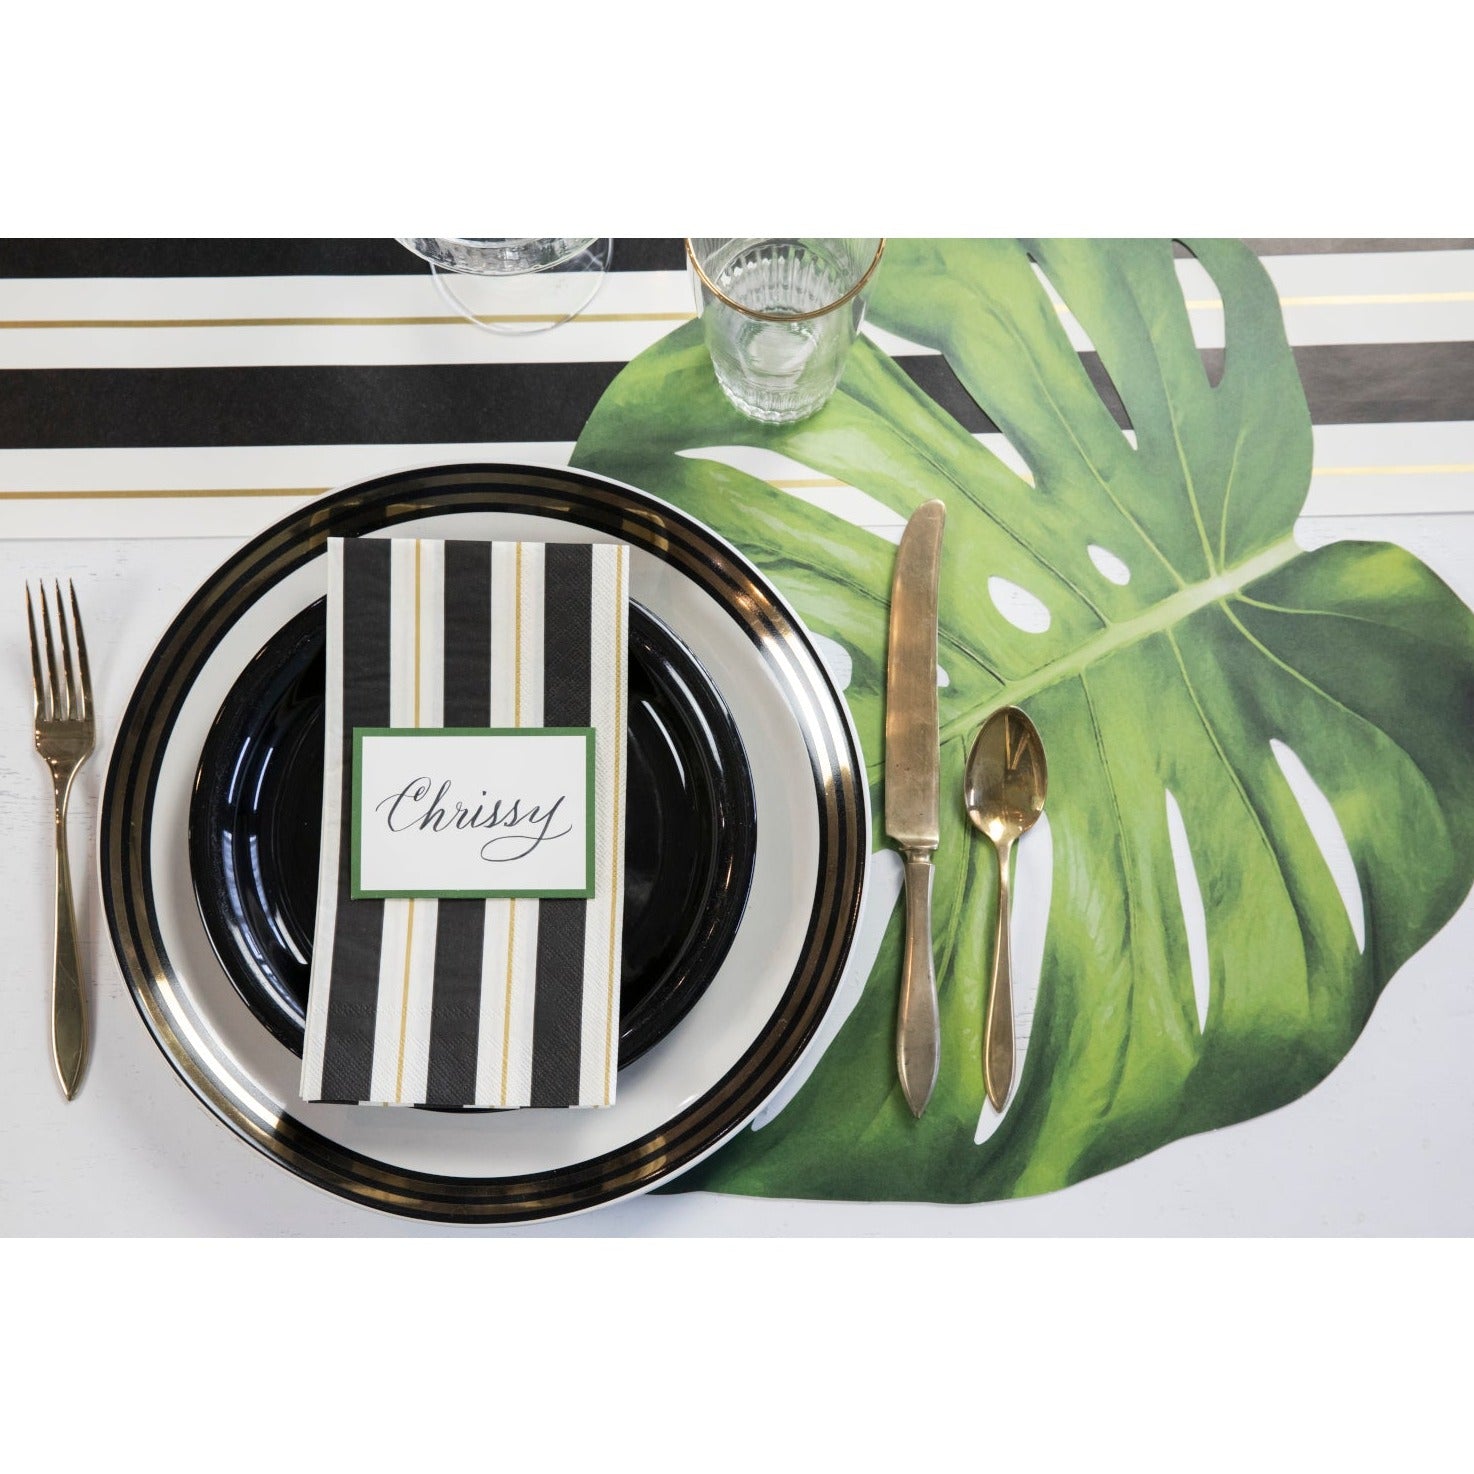 An elegant table setting featuring a Die-cut Monstera Placemat from Hester &amp; Cook as a stylish touch.